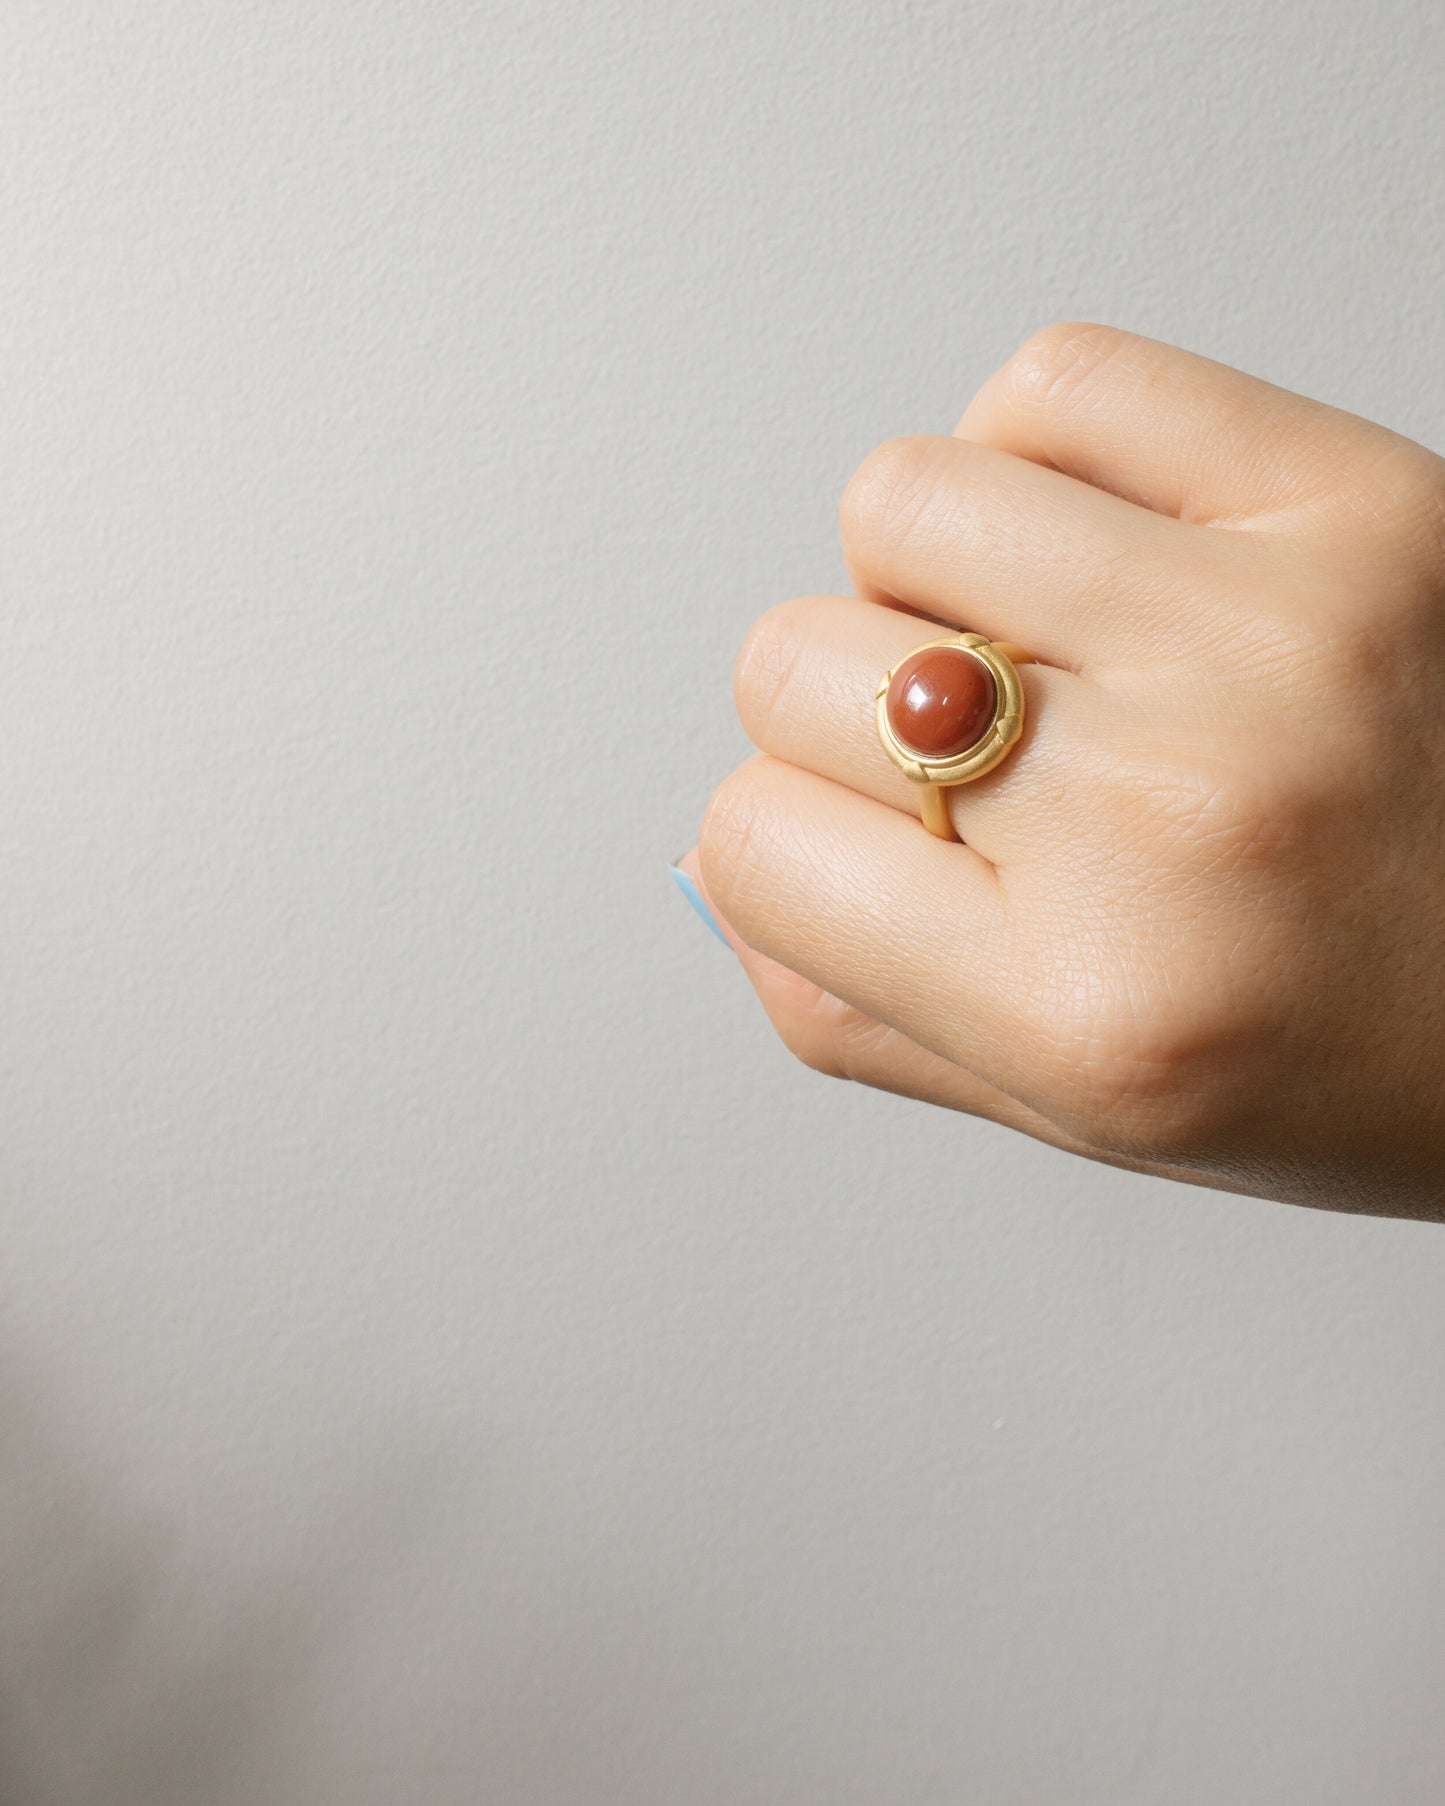 "Simone" round red agate ring